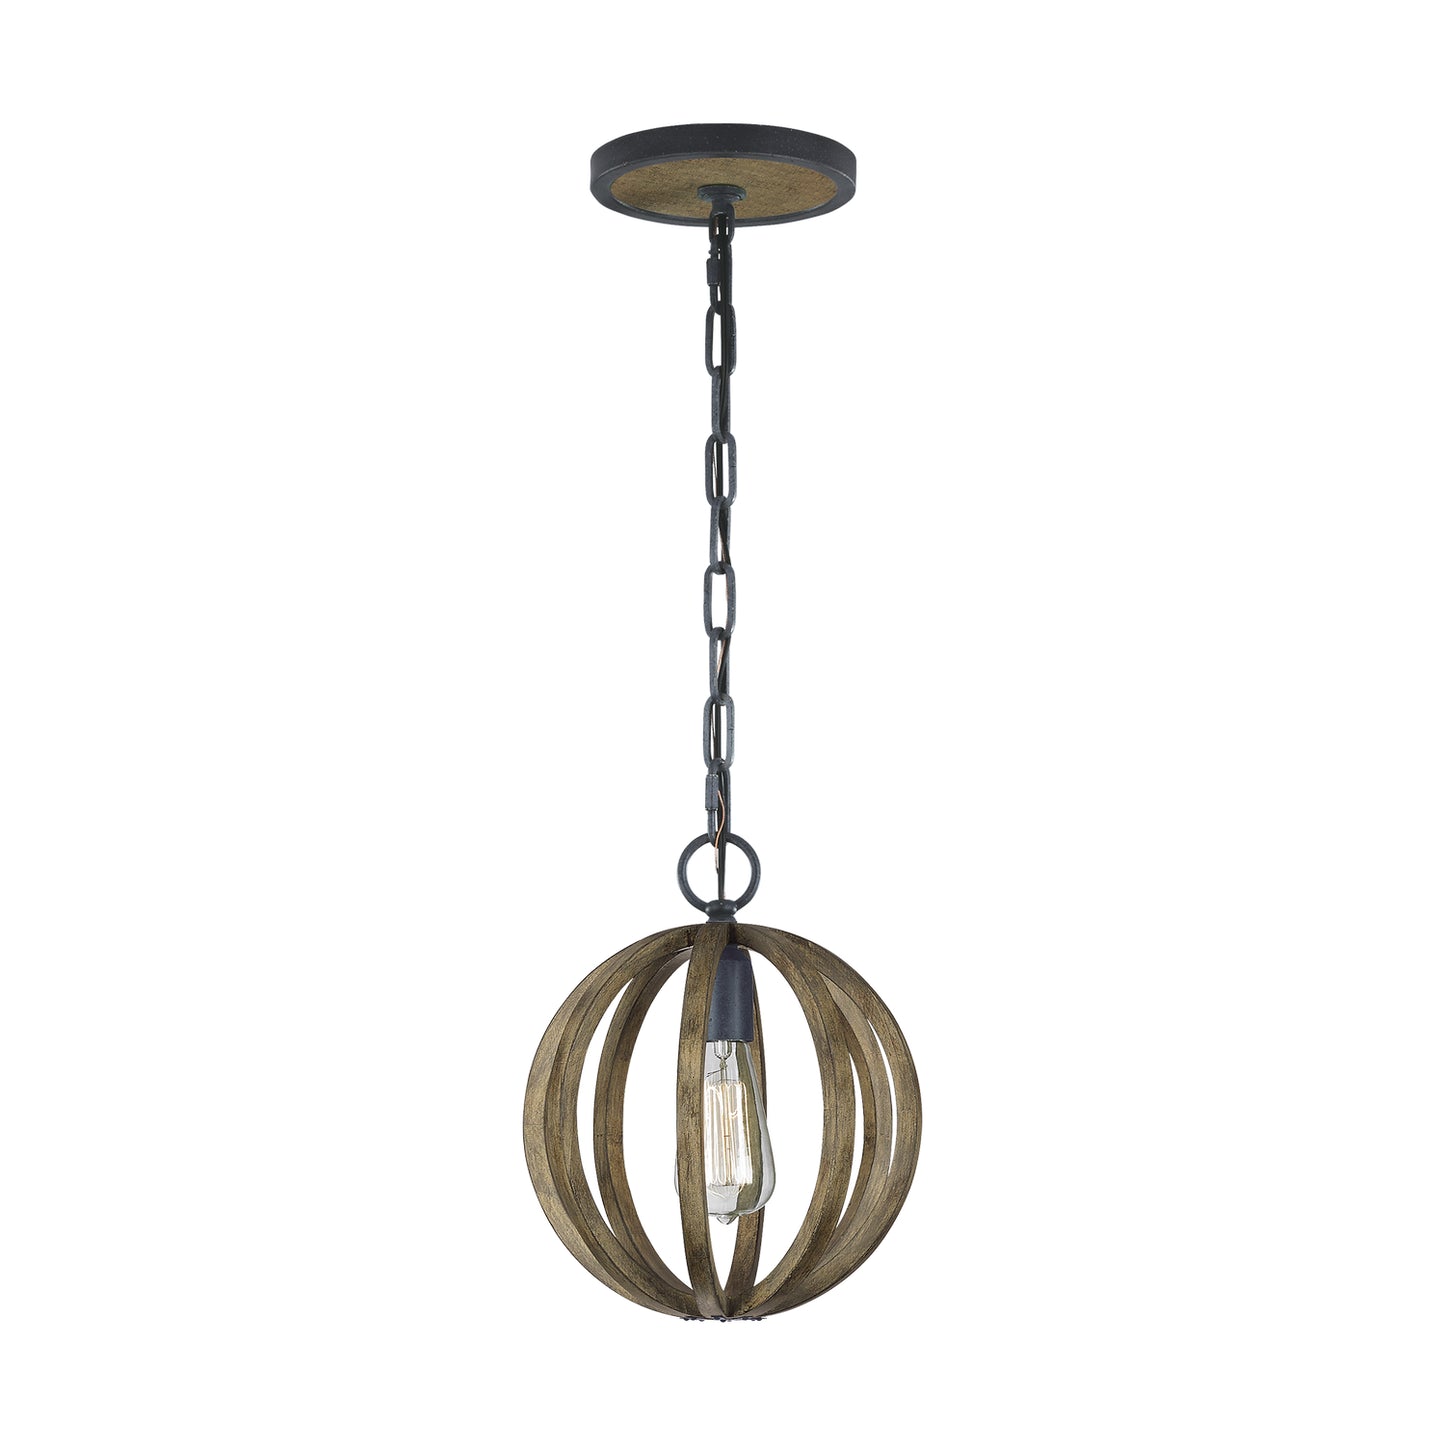 Visual Comfort Studio - P1302WOW/AF - One Light Mini Pendant - Allier - Weathered Oak Wood / Antique Forged Iron